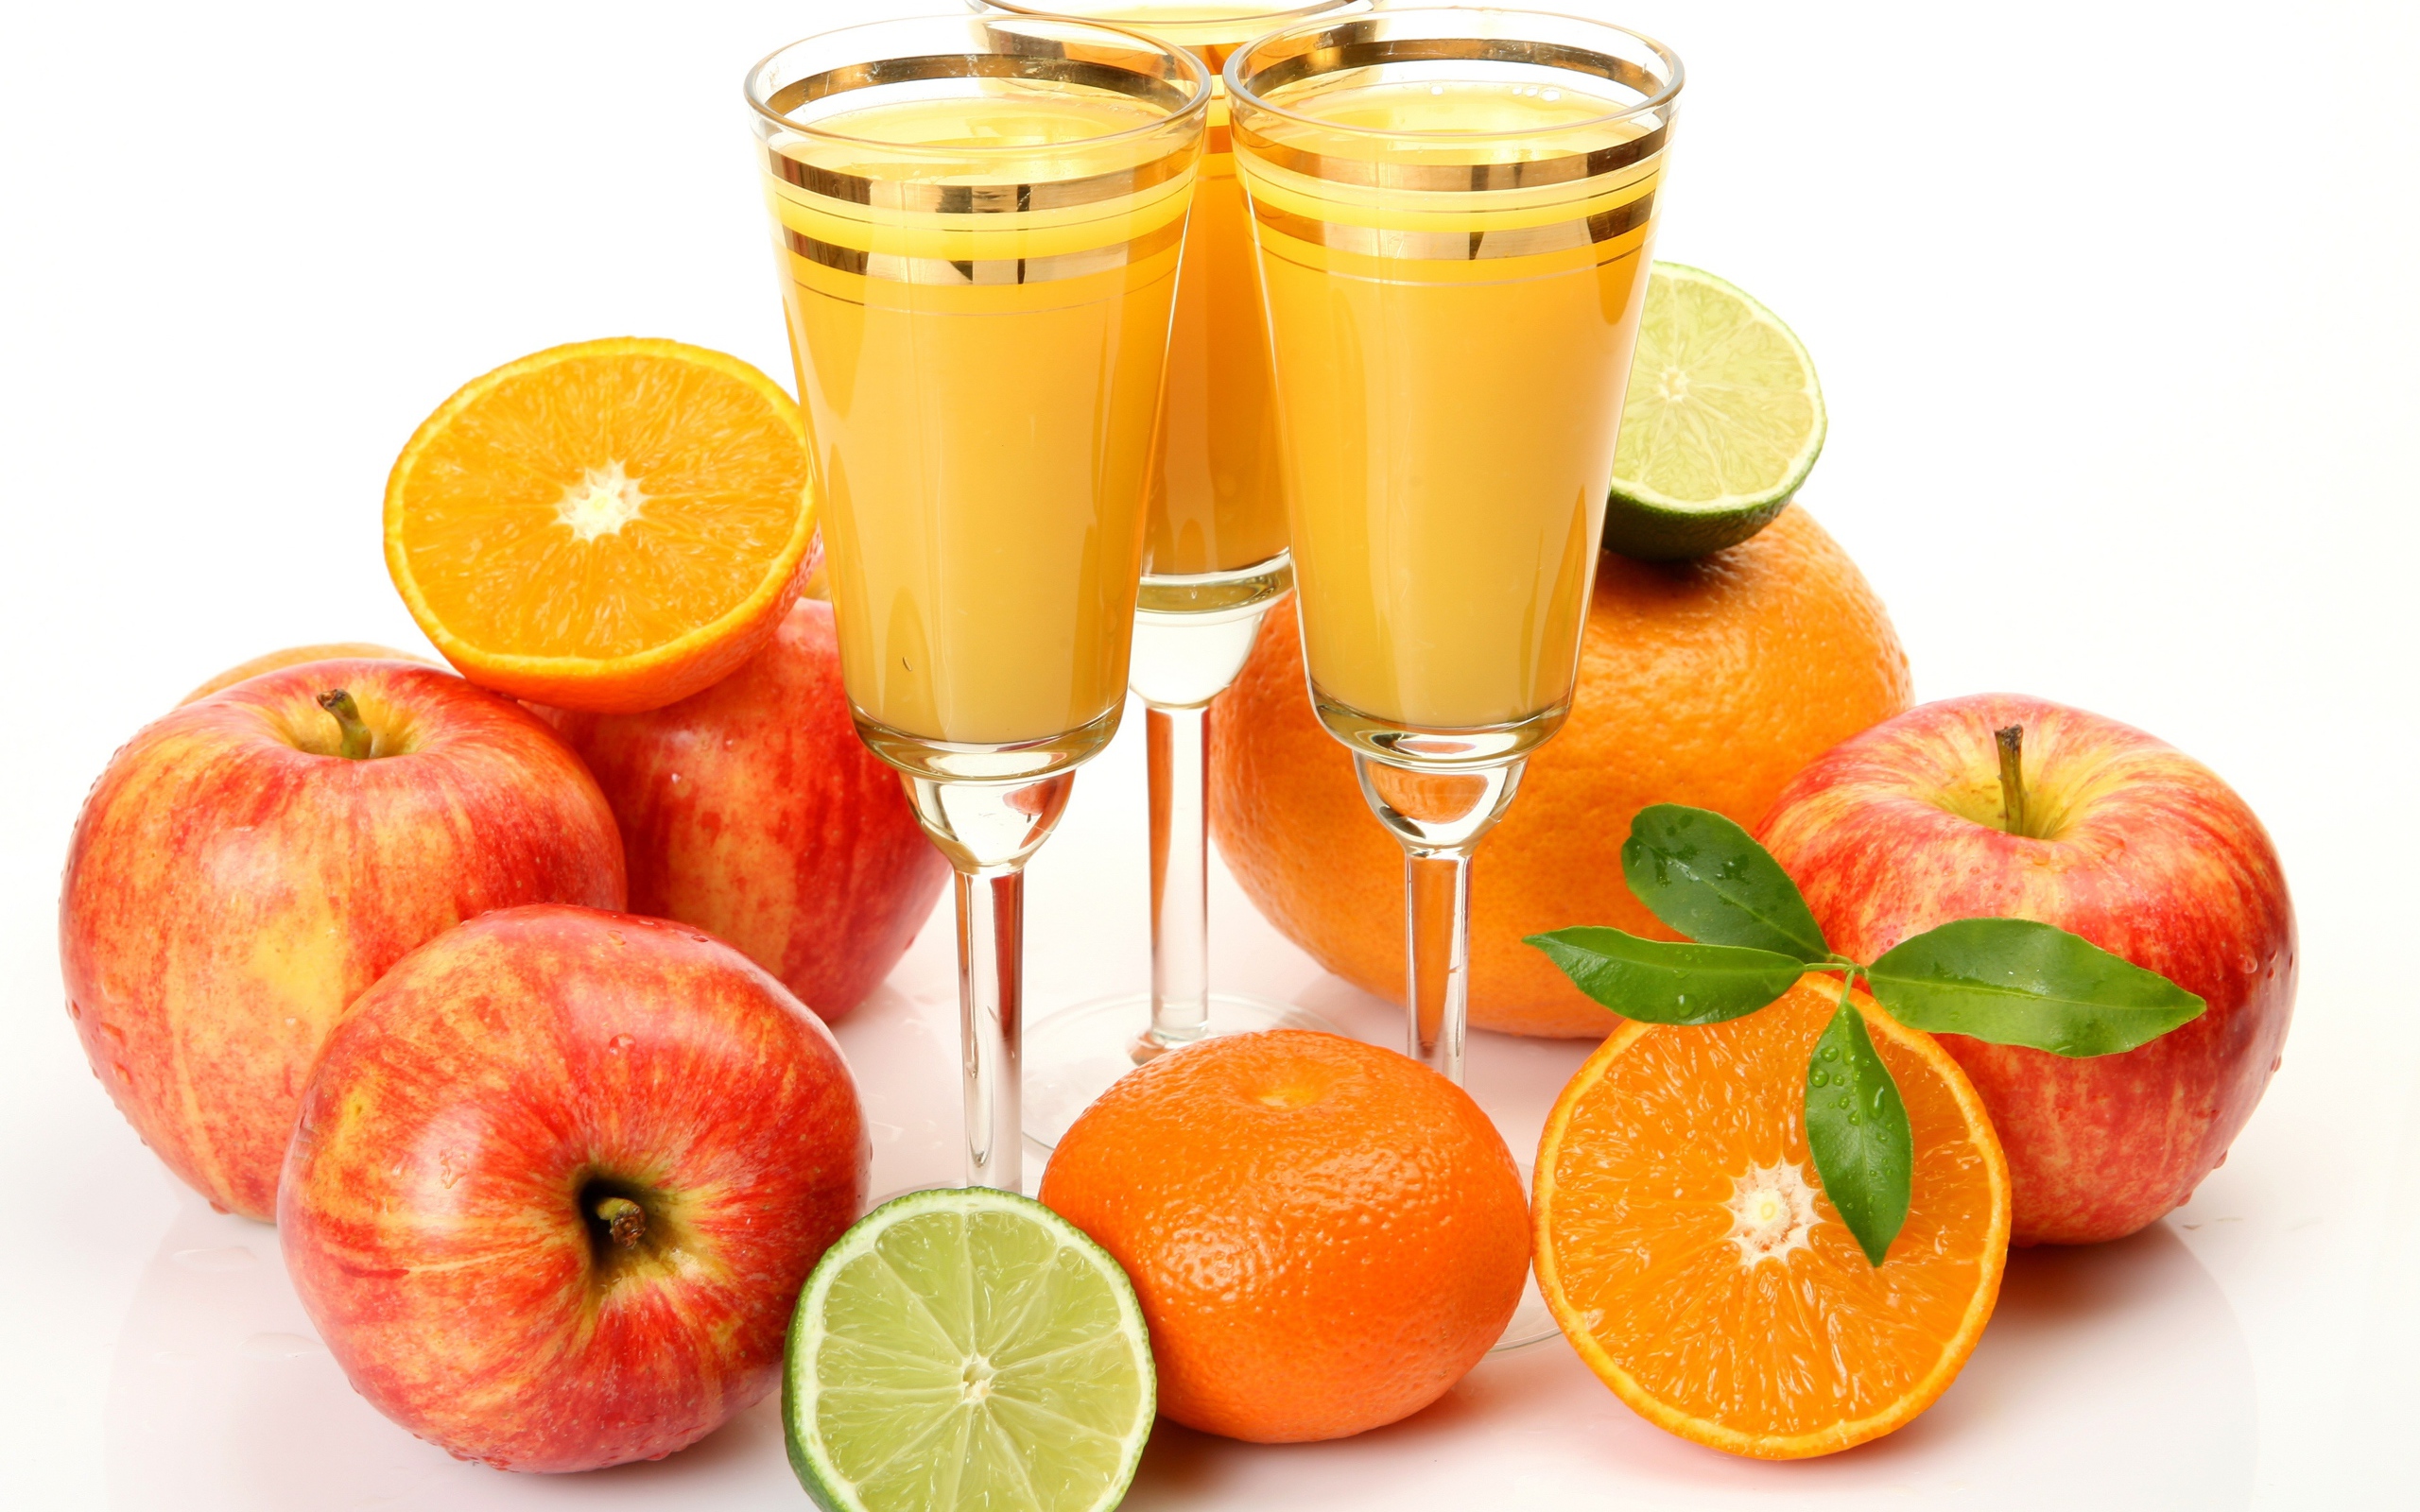 Three glasses of juice on the table with apples and oranges on a white background